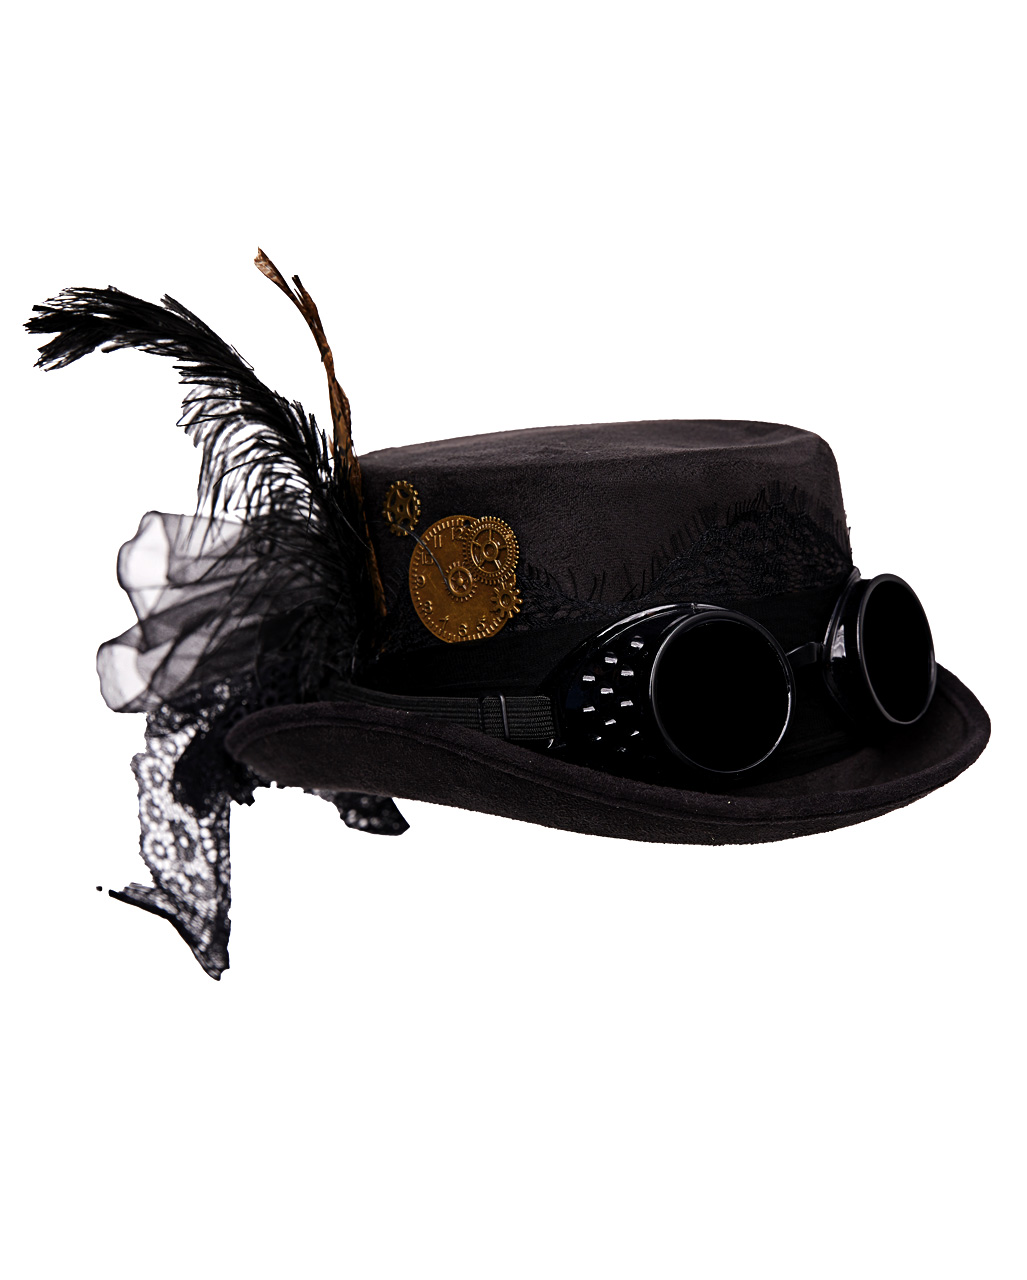 Deluxe Velvet 4.25 Inch Steampunk Top Hat with Removable Goggles Black 